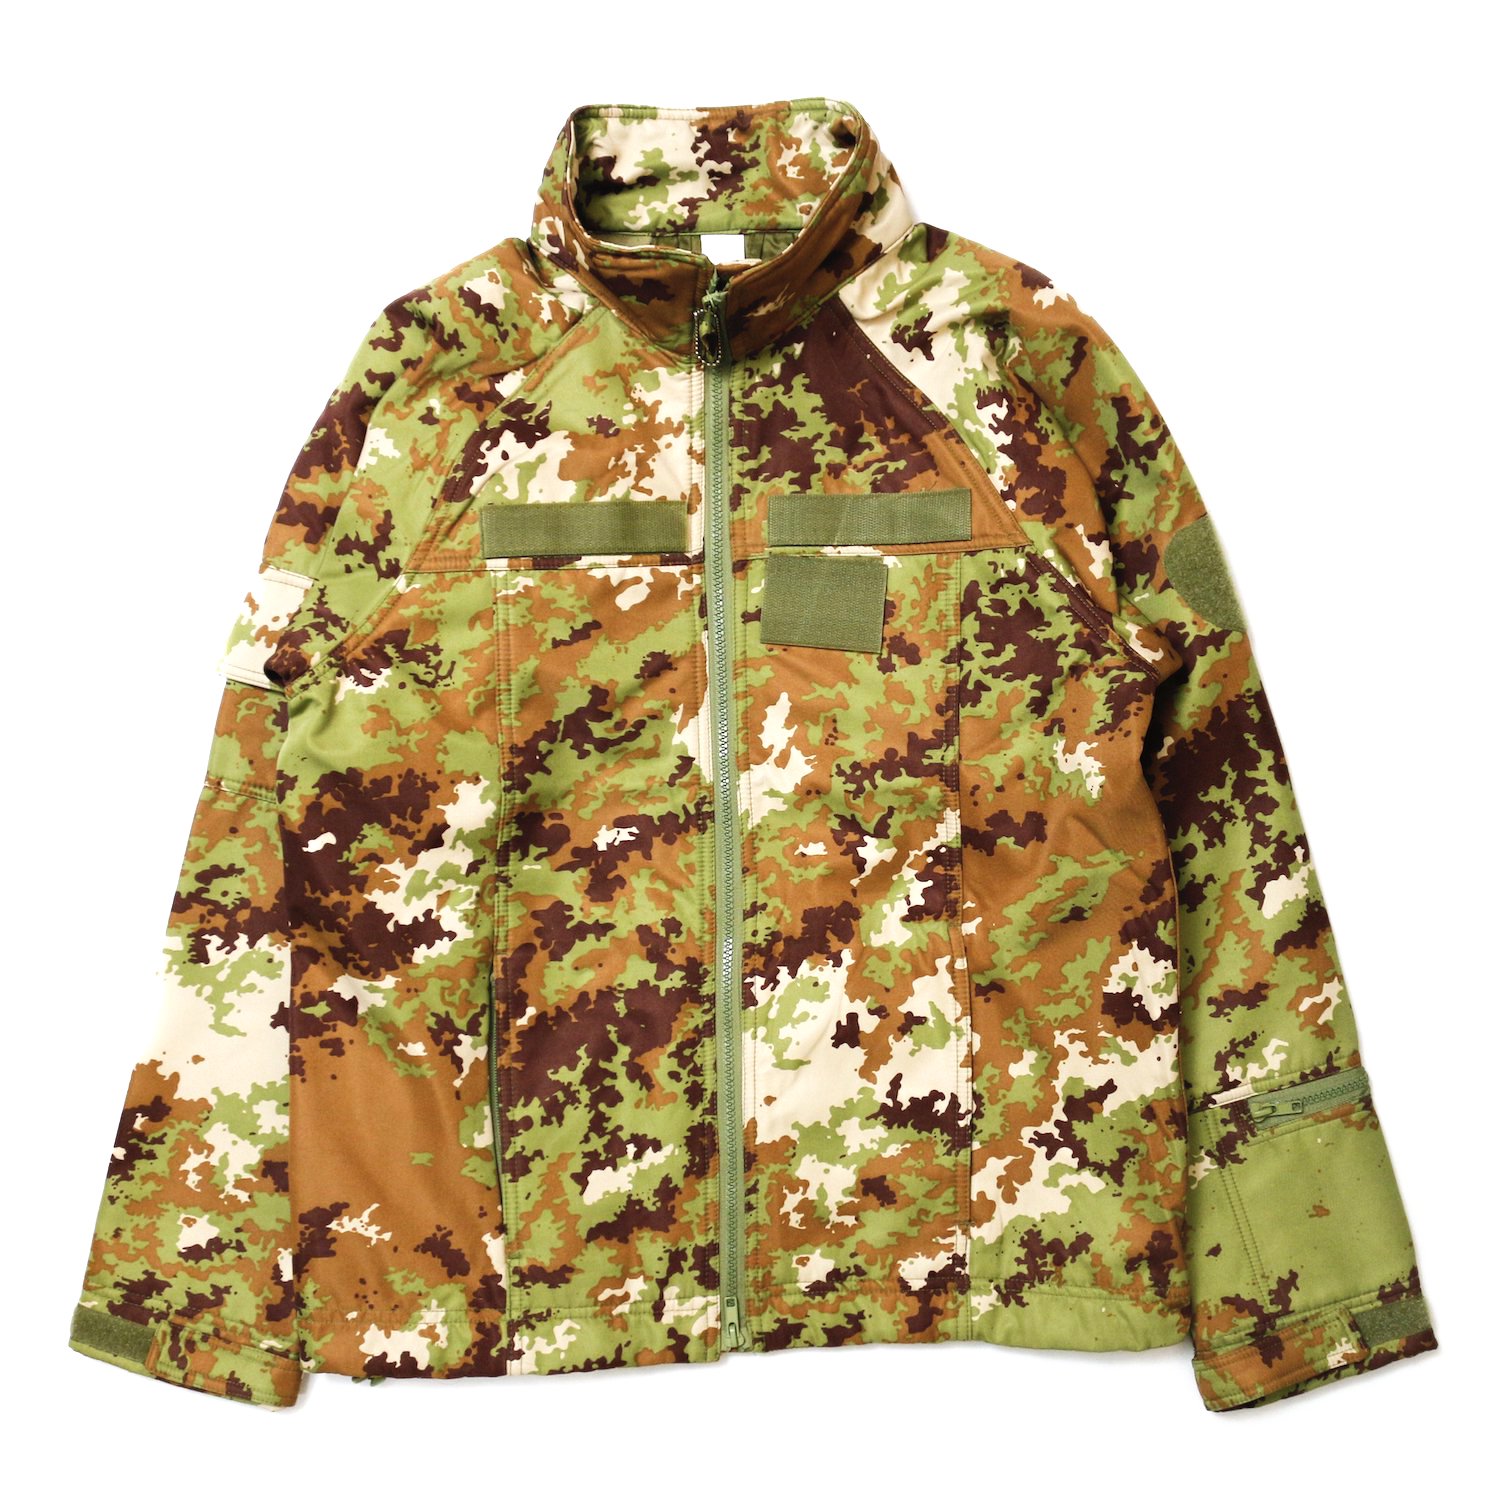 <img class='new_mark_img1' src='https://img.shop-pro.jp/img/new/icons8.gif' style='border:none;display:inline;margin:0px;padding:0px;width:auto;' />MILITARY / Italian Army Soft Shell Jacket